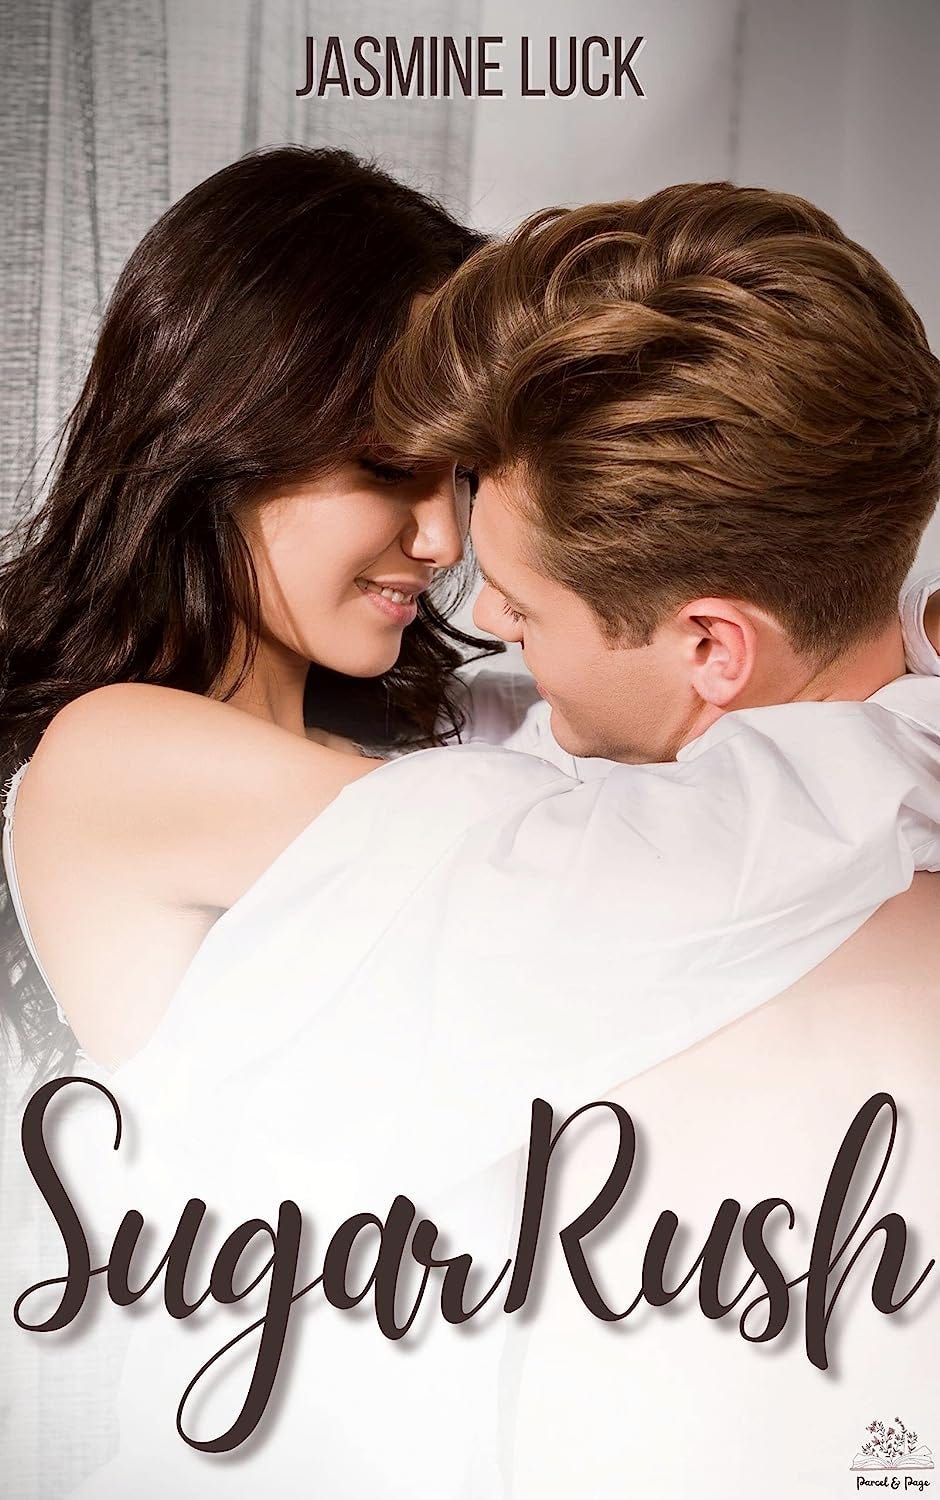 Book cover of Sugar Rush by Jasmine Luck, showing an embracing couple.